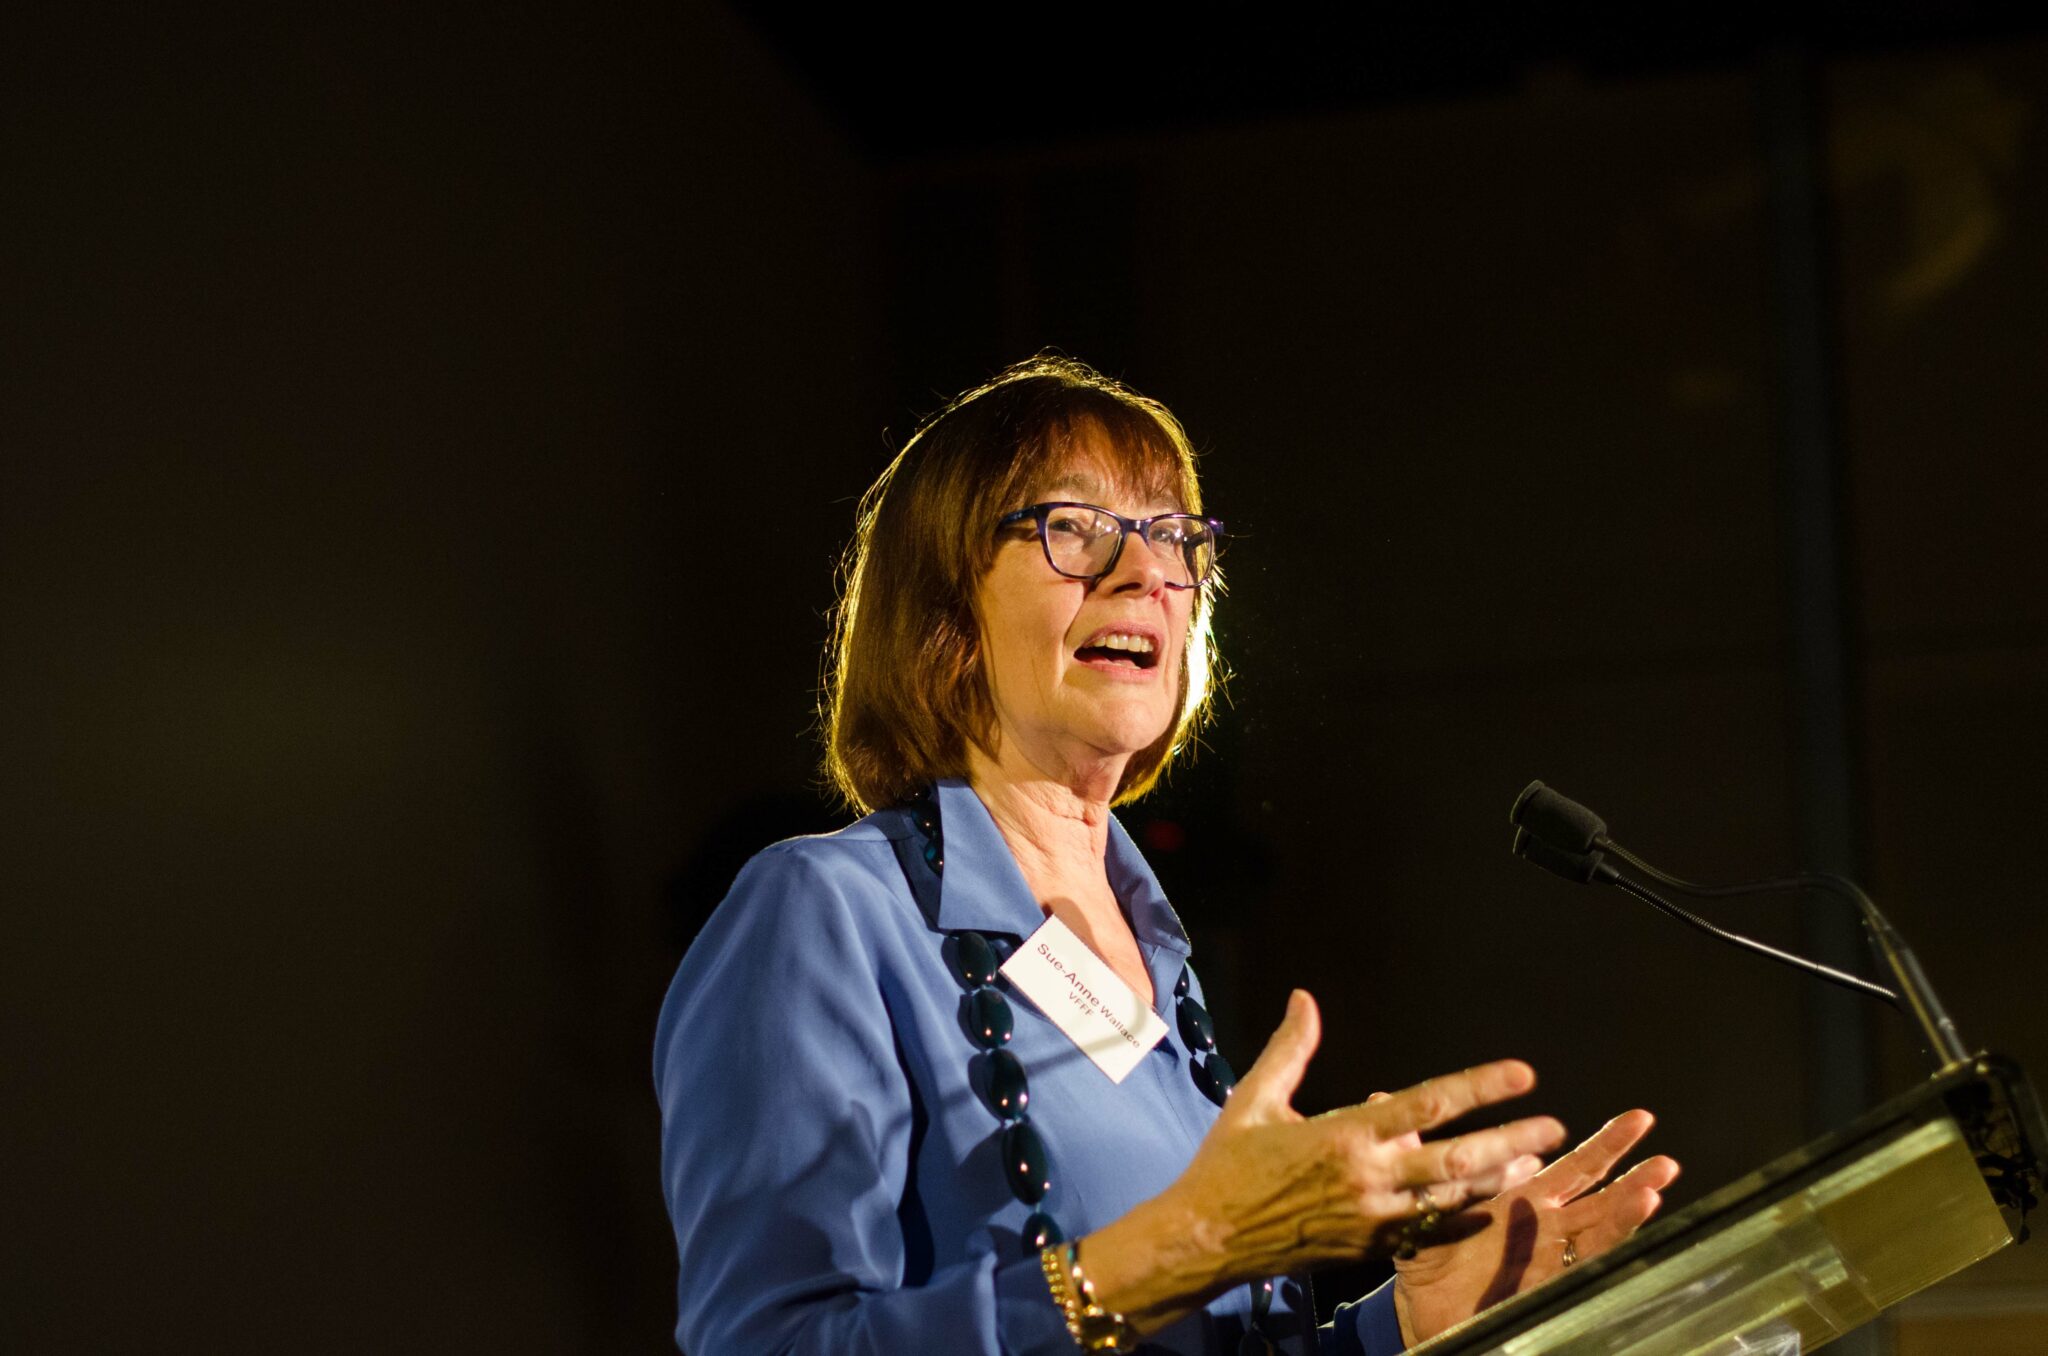 Dr. Sue-Anne Wallace AM speaking at VFFF’s 50th Anniversary Celebration event